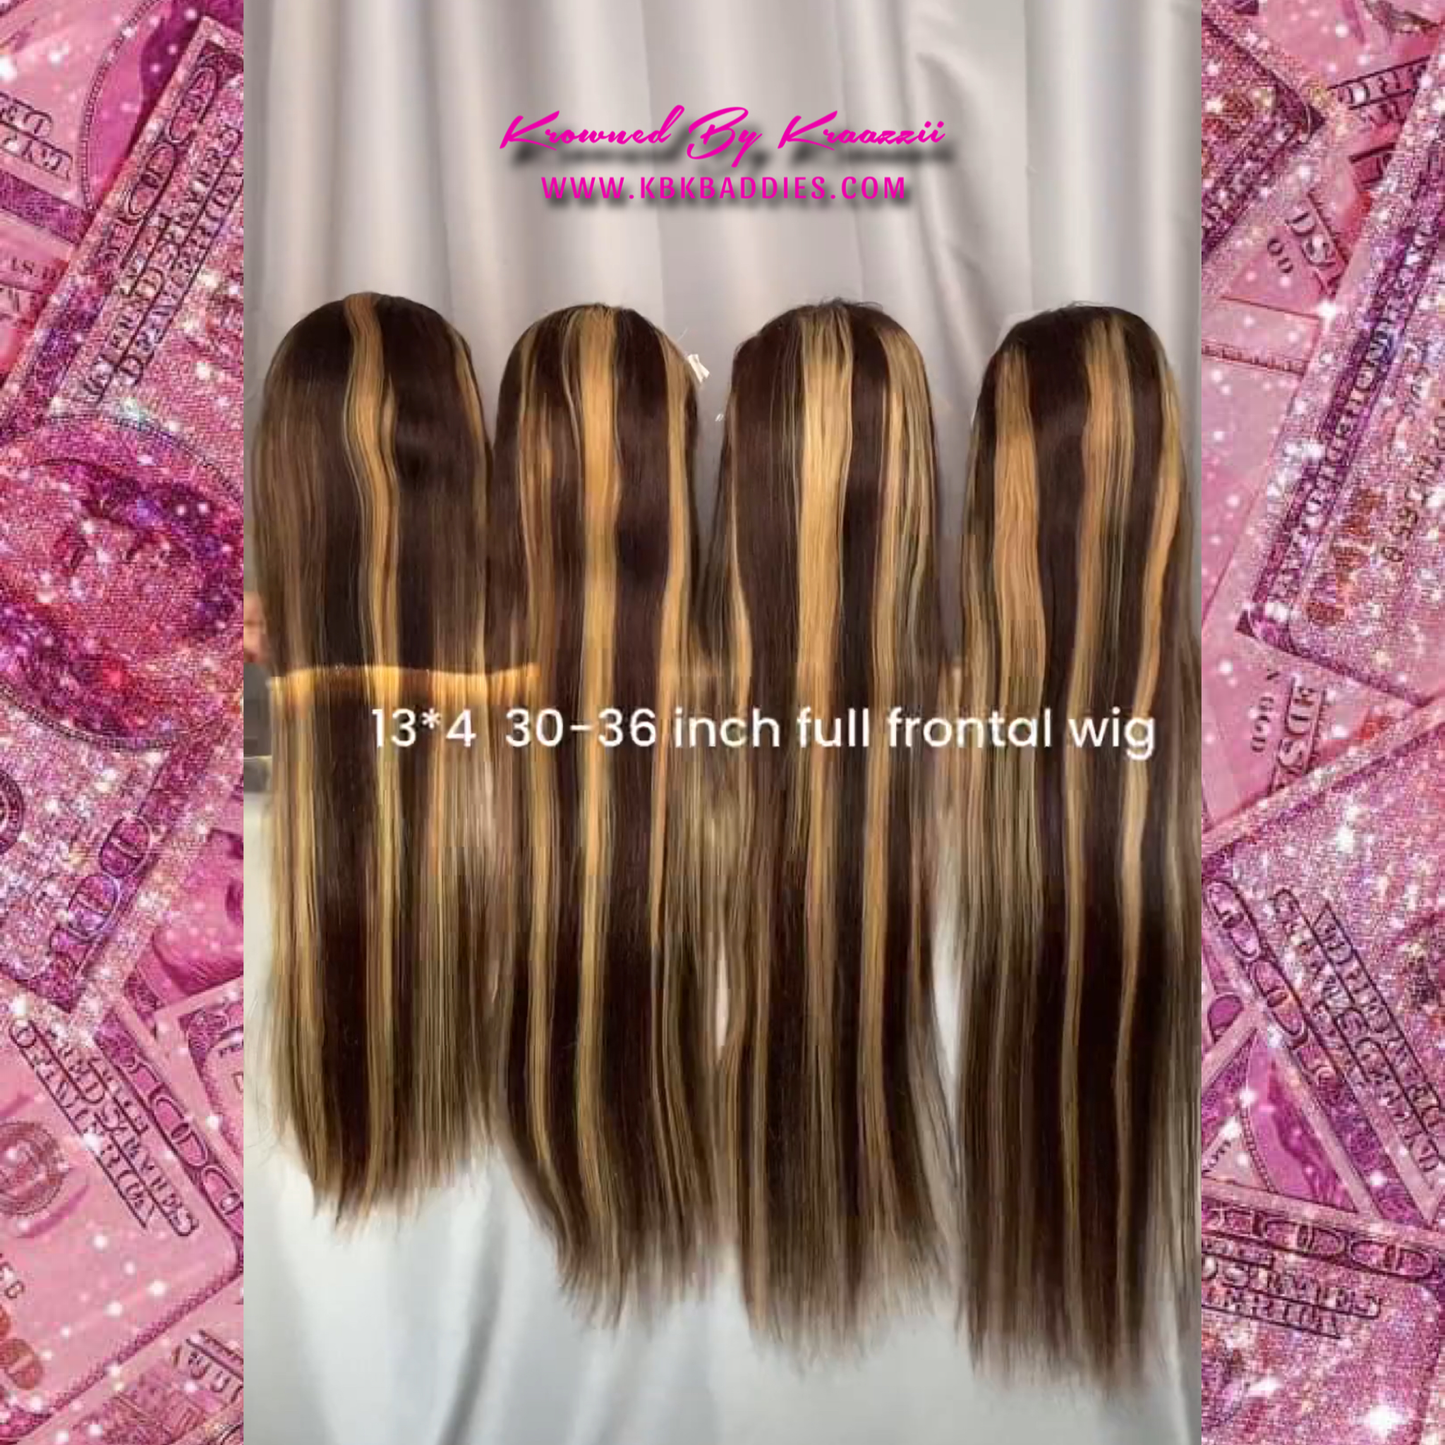 NEW 13x4 Straight “Reese’s Babe” Frontal Wig